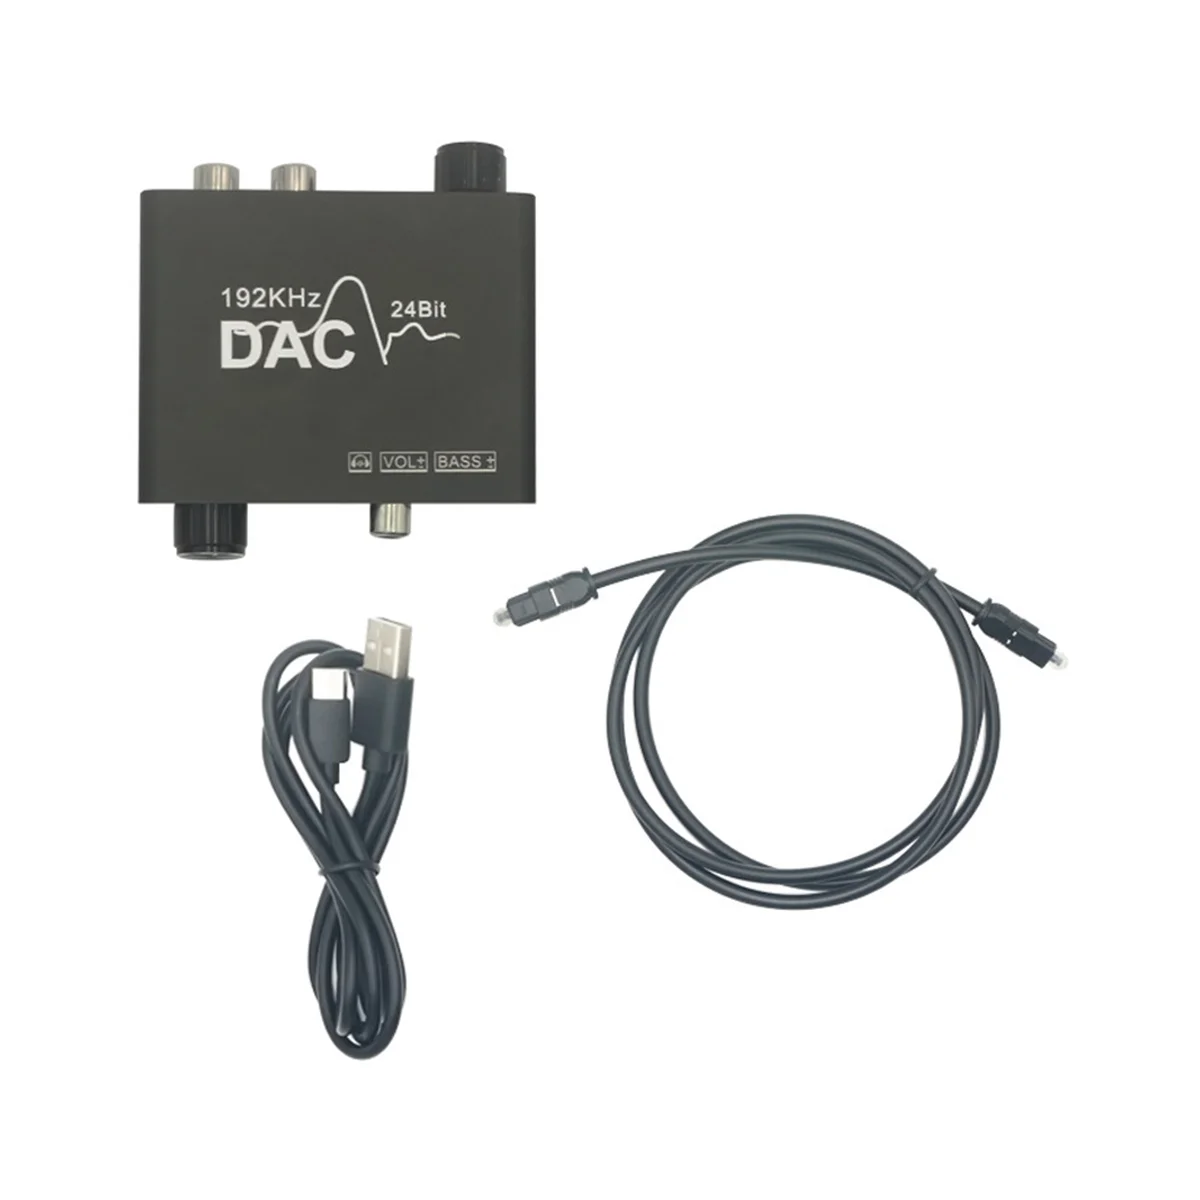 

192KHz DAC Converter Digital Optical Coaxial Toslink to Analog L/R RCA 3.5mm o Converter Adapter with Volume Control